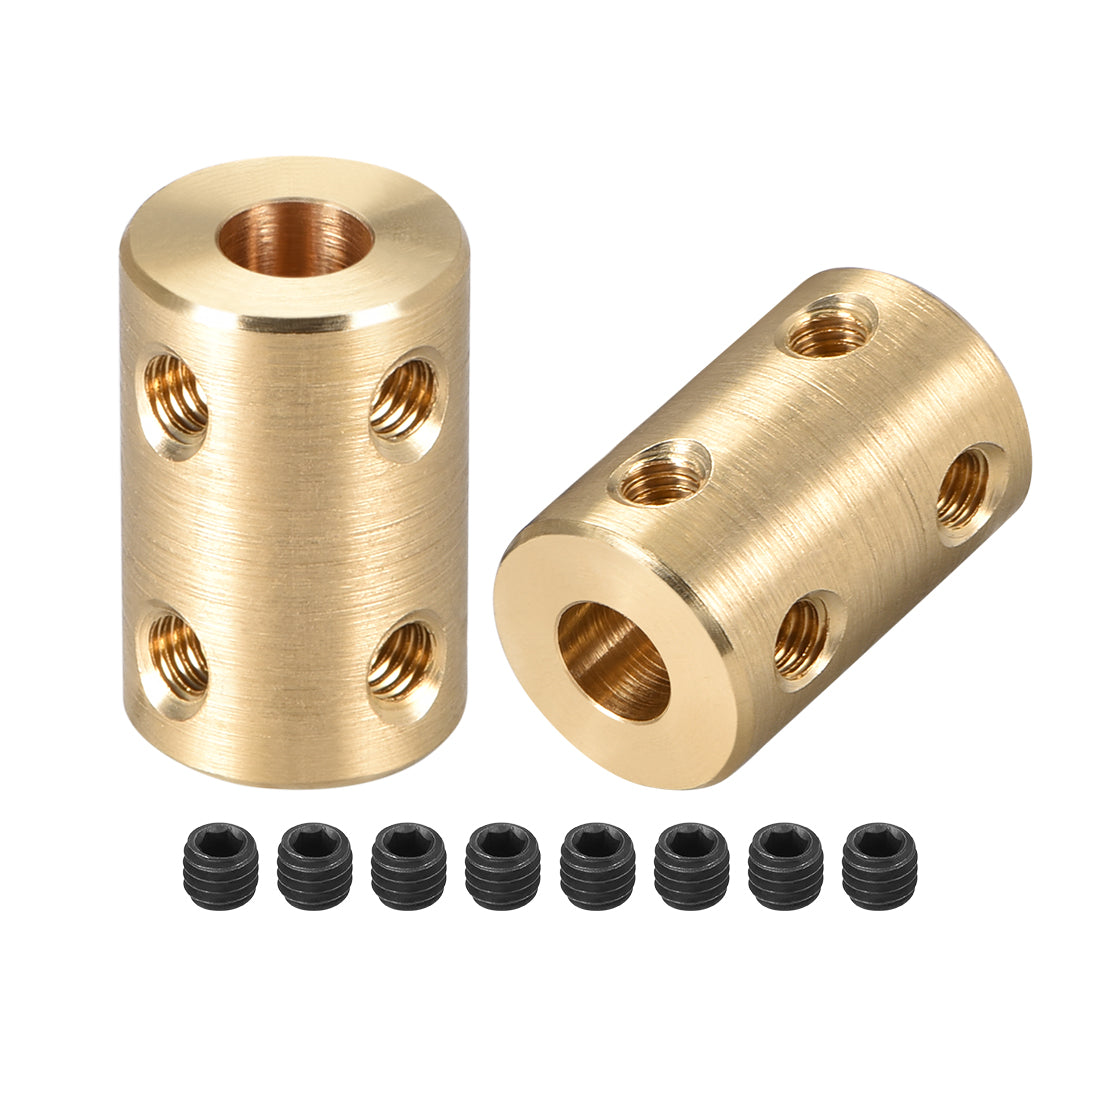 uxcell Uxcell Shaft Coupling 5mm to 6mm Bore L22xD14 Robot Motor Wheel Rigid Coupler Connector Gold Tone 2 Pcs